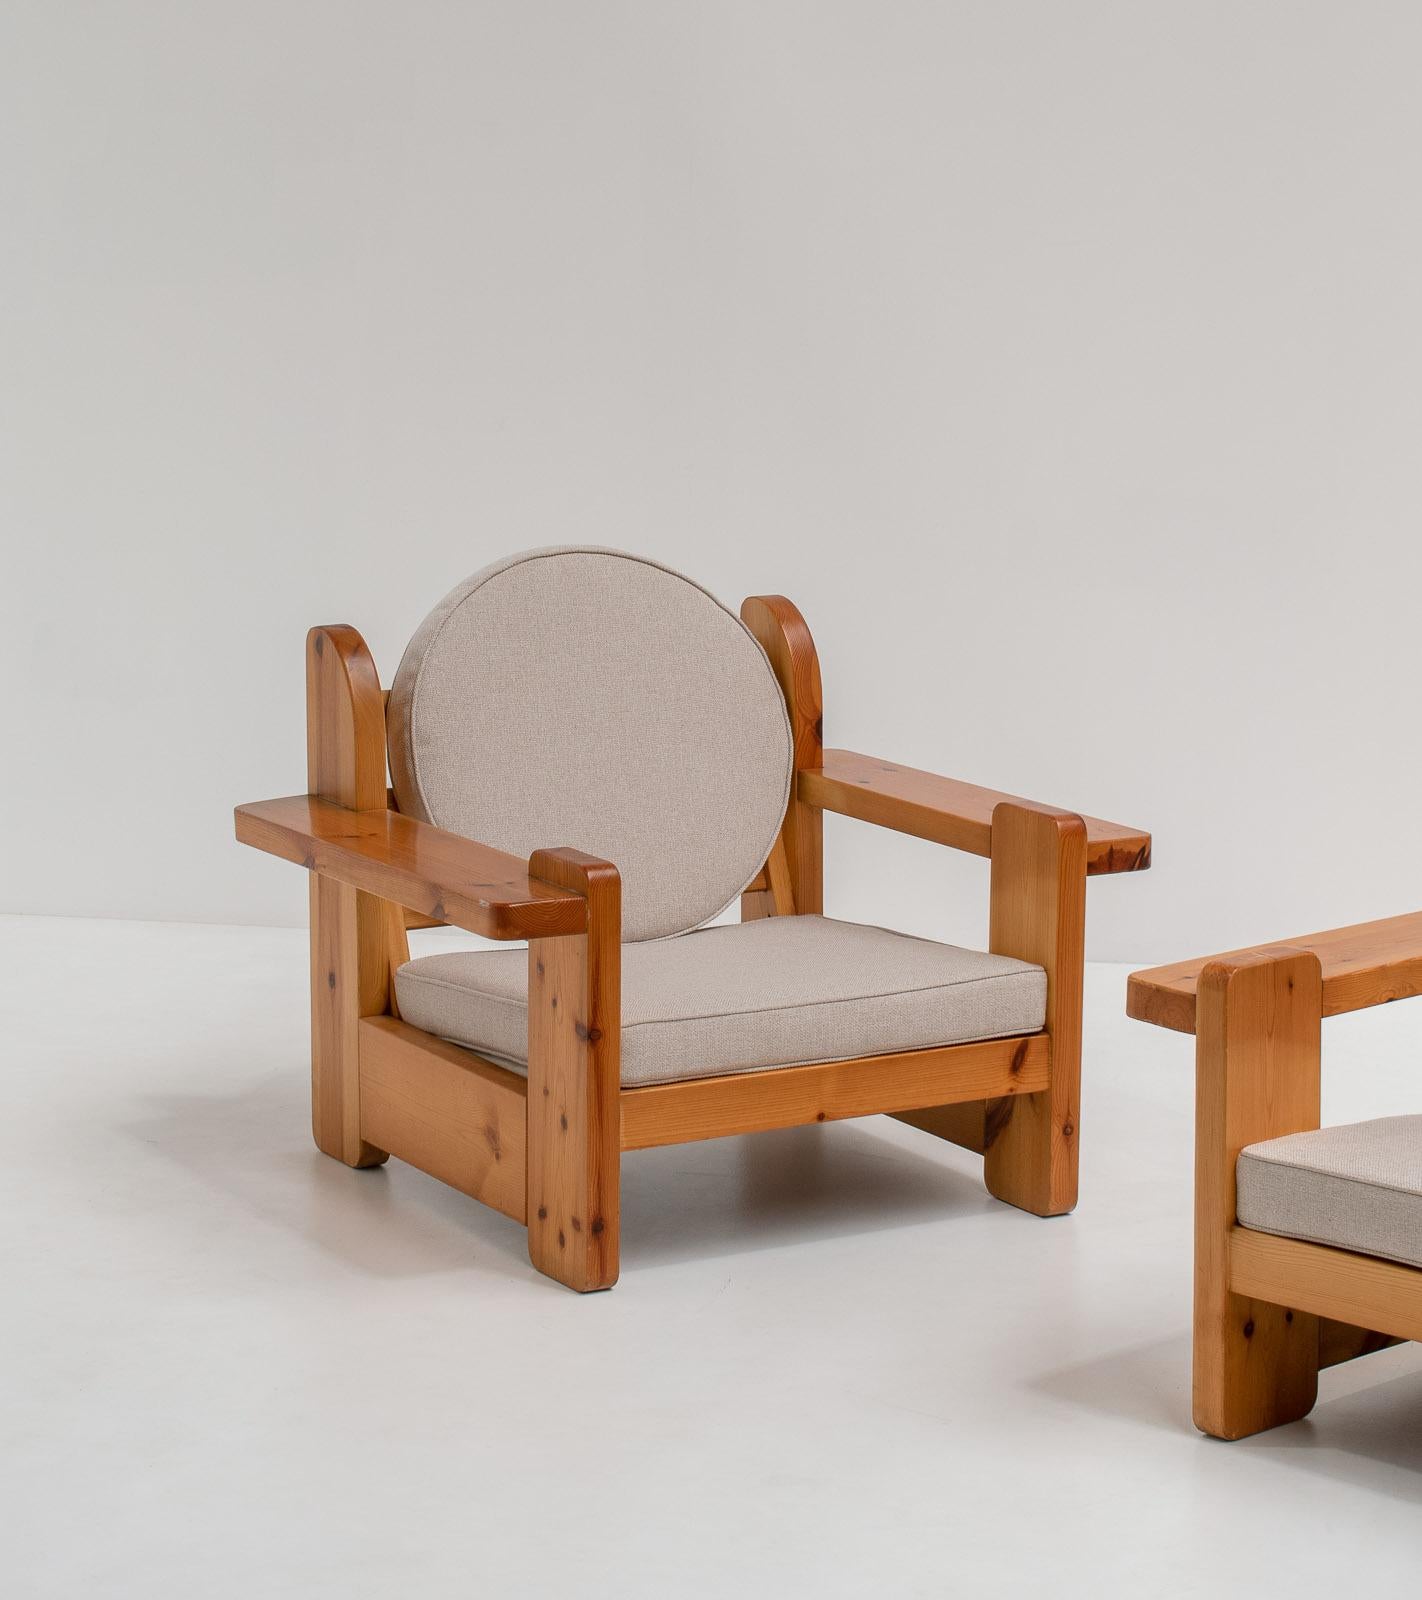 An amazing and rare pair of sculptural lounge chairs. Made out of solid pine wood. From the 1970s.

These beautiful chunky chairs are a real statement piece. The solid wooden frame is made out of some big slabs of wood. It has the perfect golden